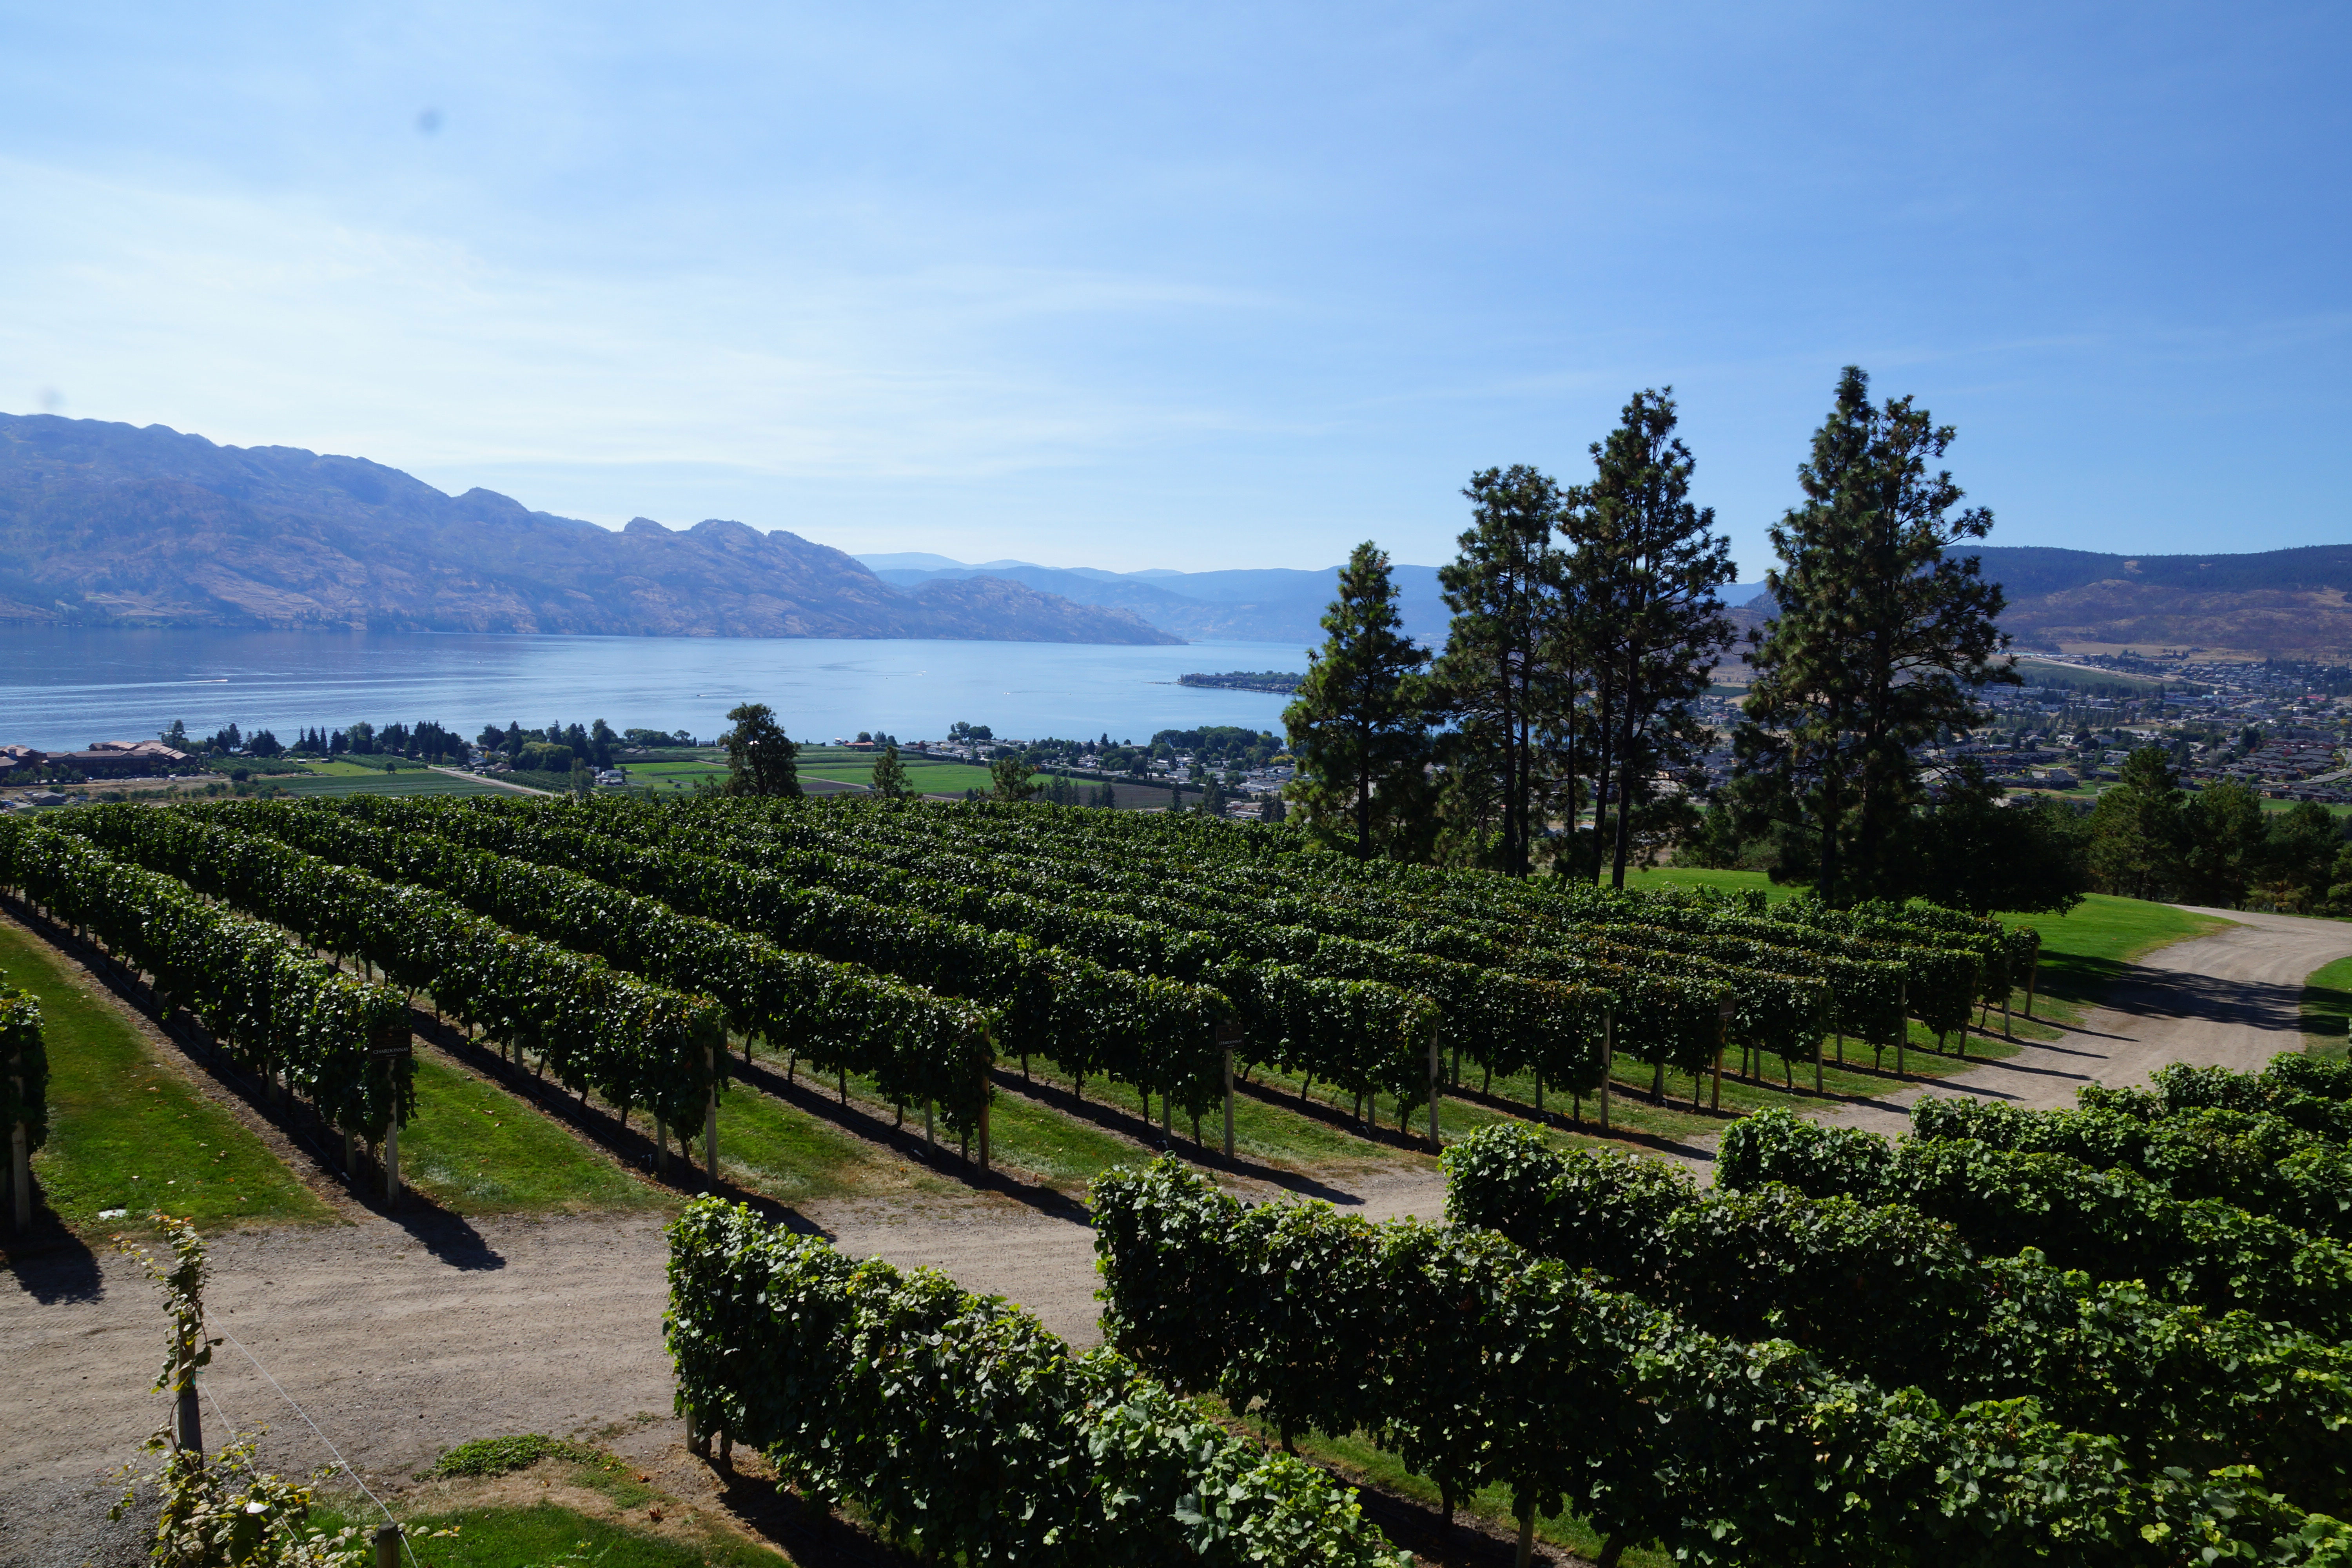 Winery tours are a fun pastime in the Okanagan Valley for both locals and visitors alike!